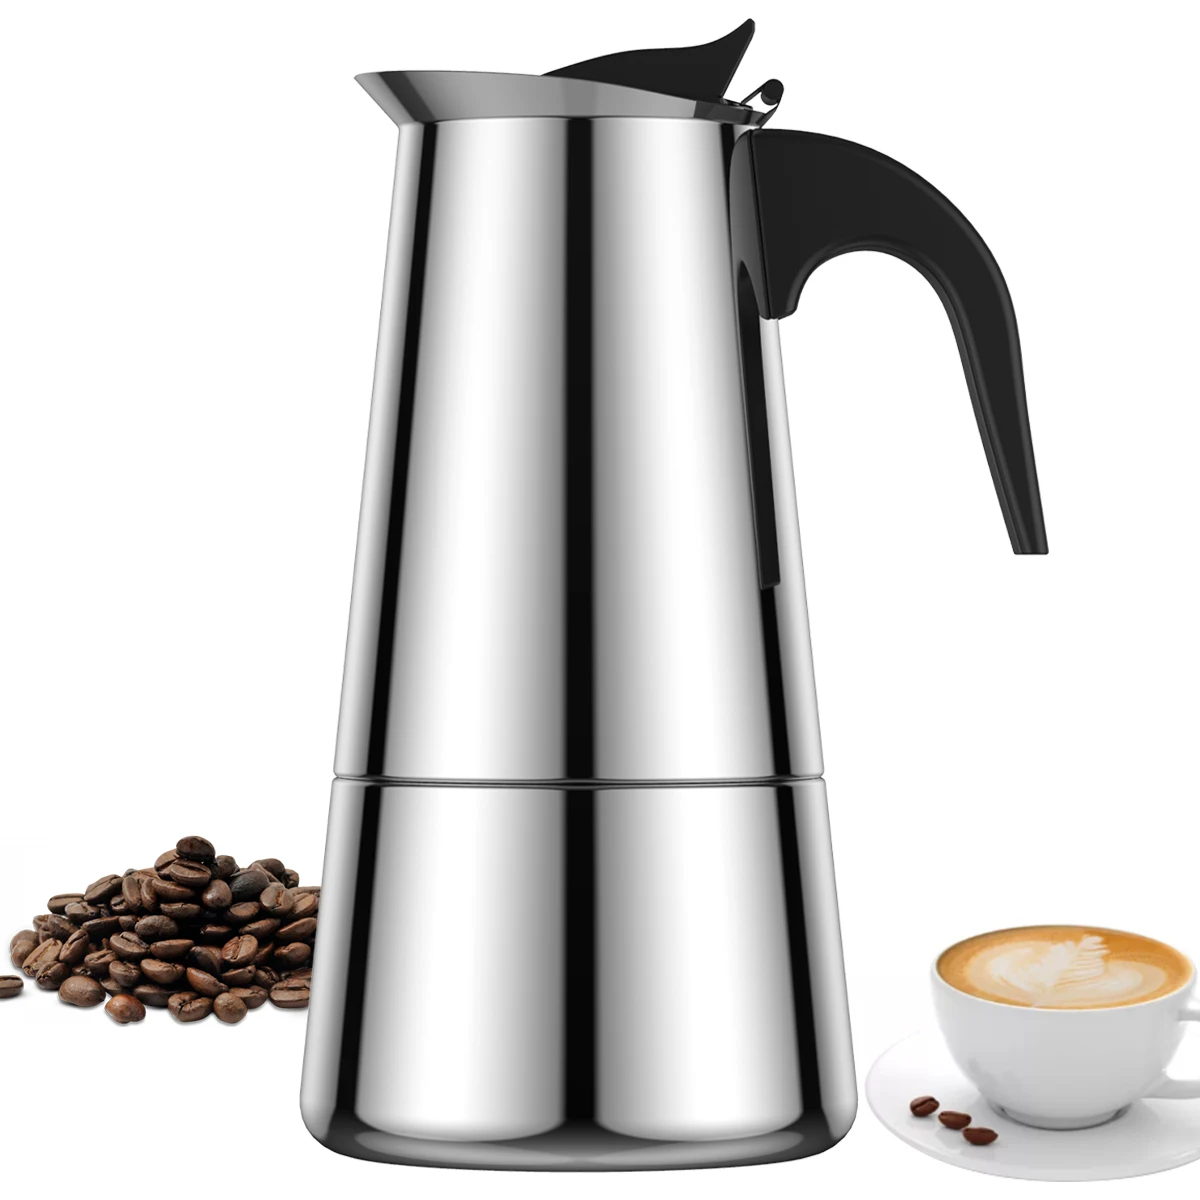 

L Espresso Maker Induction Coffee Maker Stainless Steel Stovetop Coffee Maker Moka Pot 200ml/4 Cup Portable Coffee Maker Pot